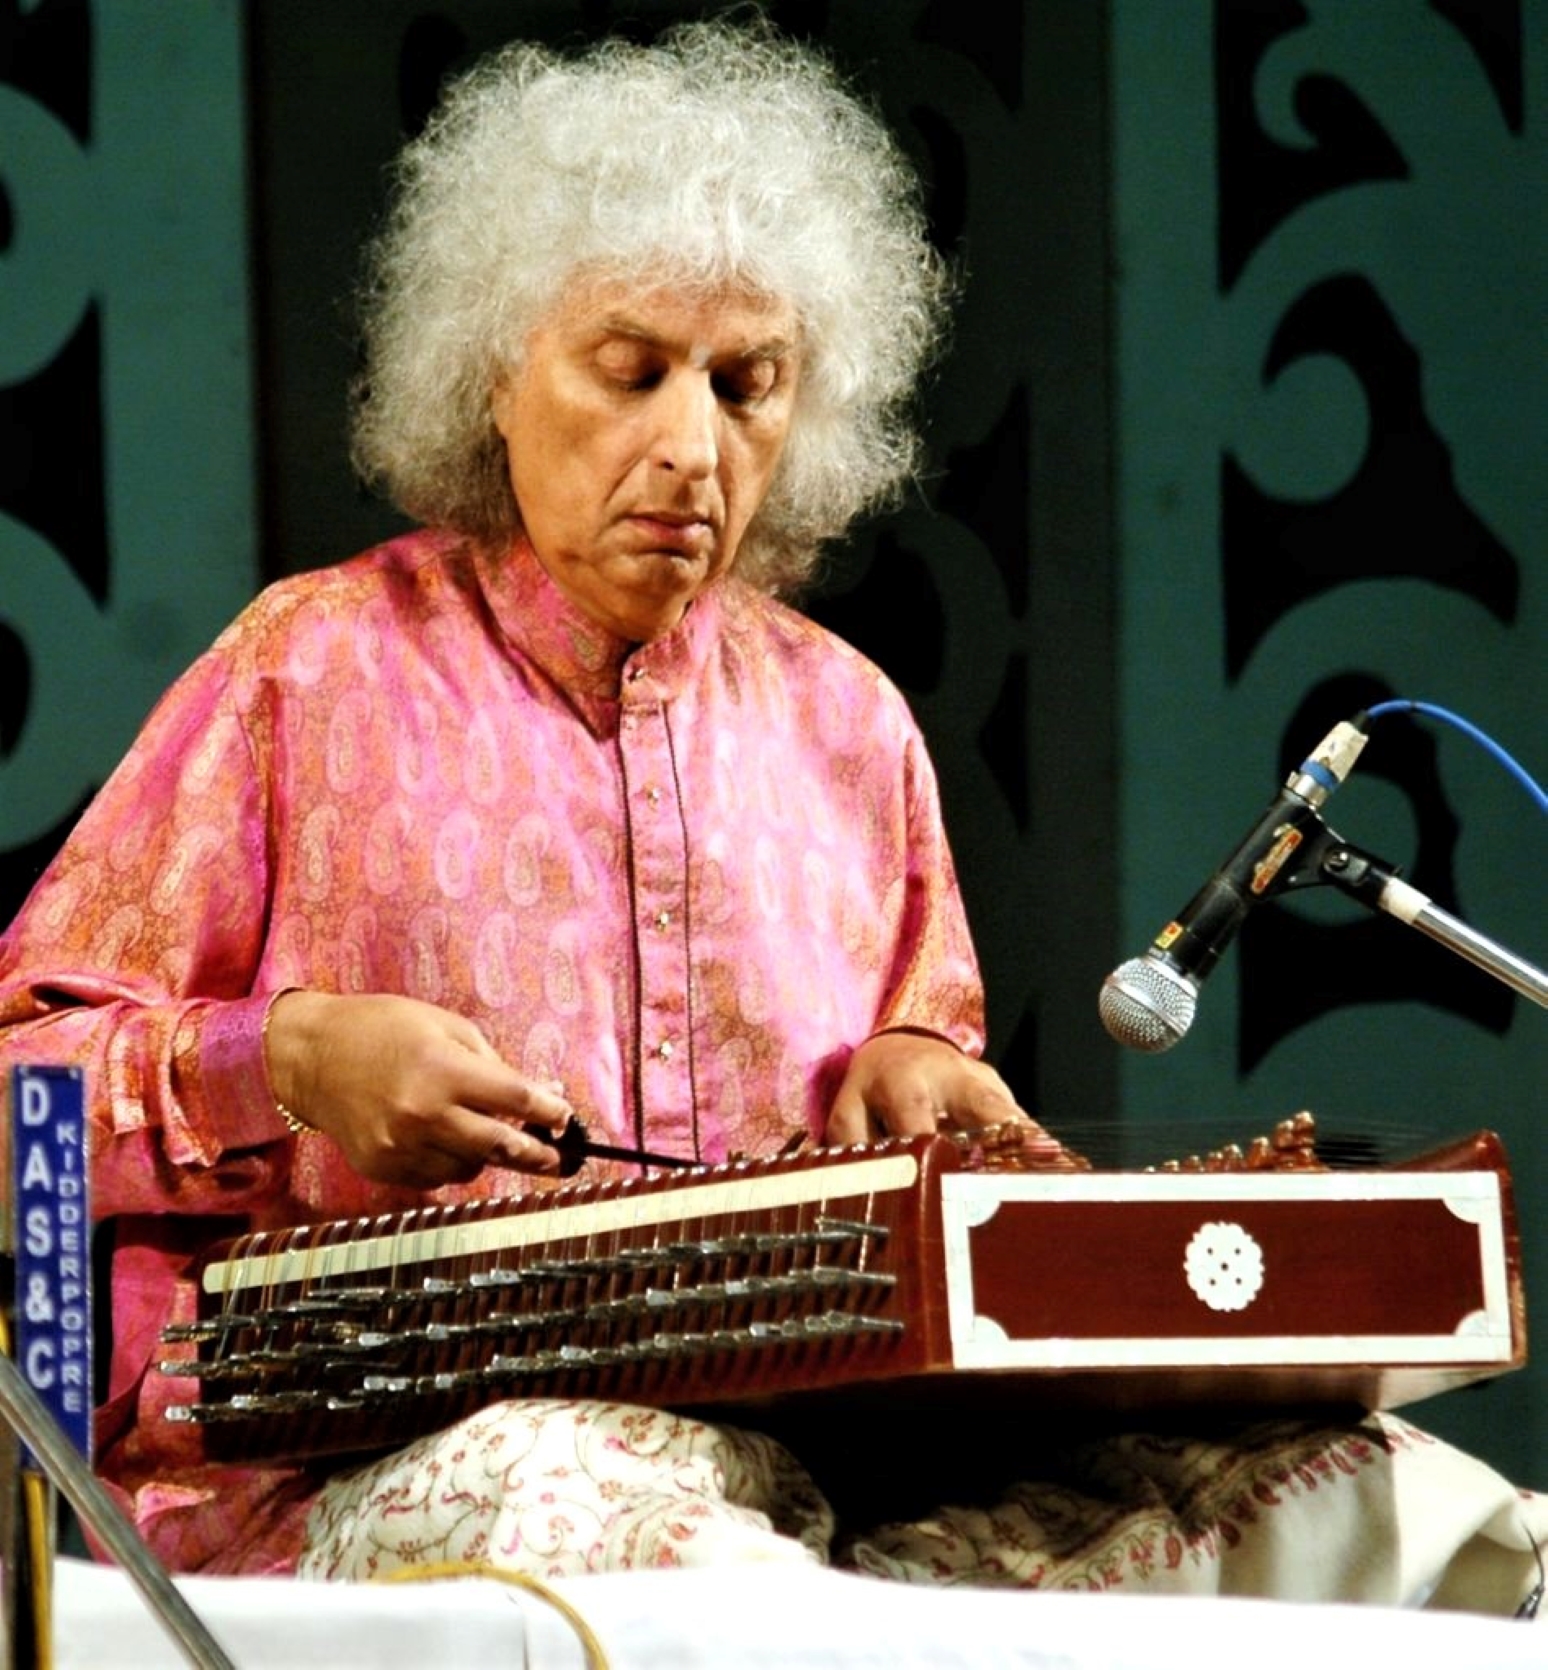 Santoor maestro Shivkumar Sharma is no more. Yet, his creations will keep regaling music-lovers for years to come